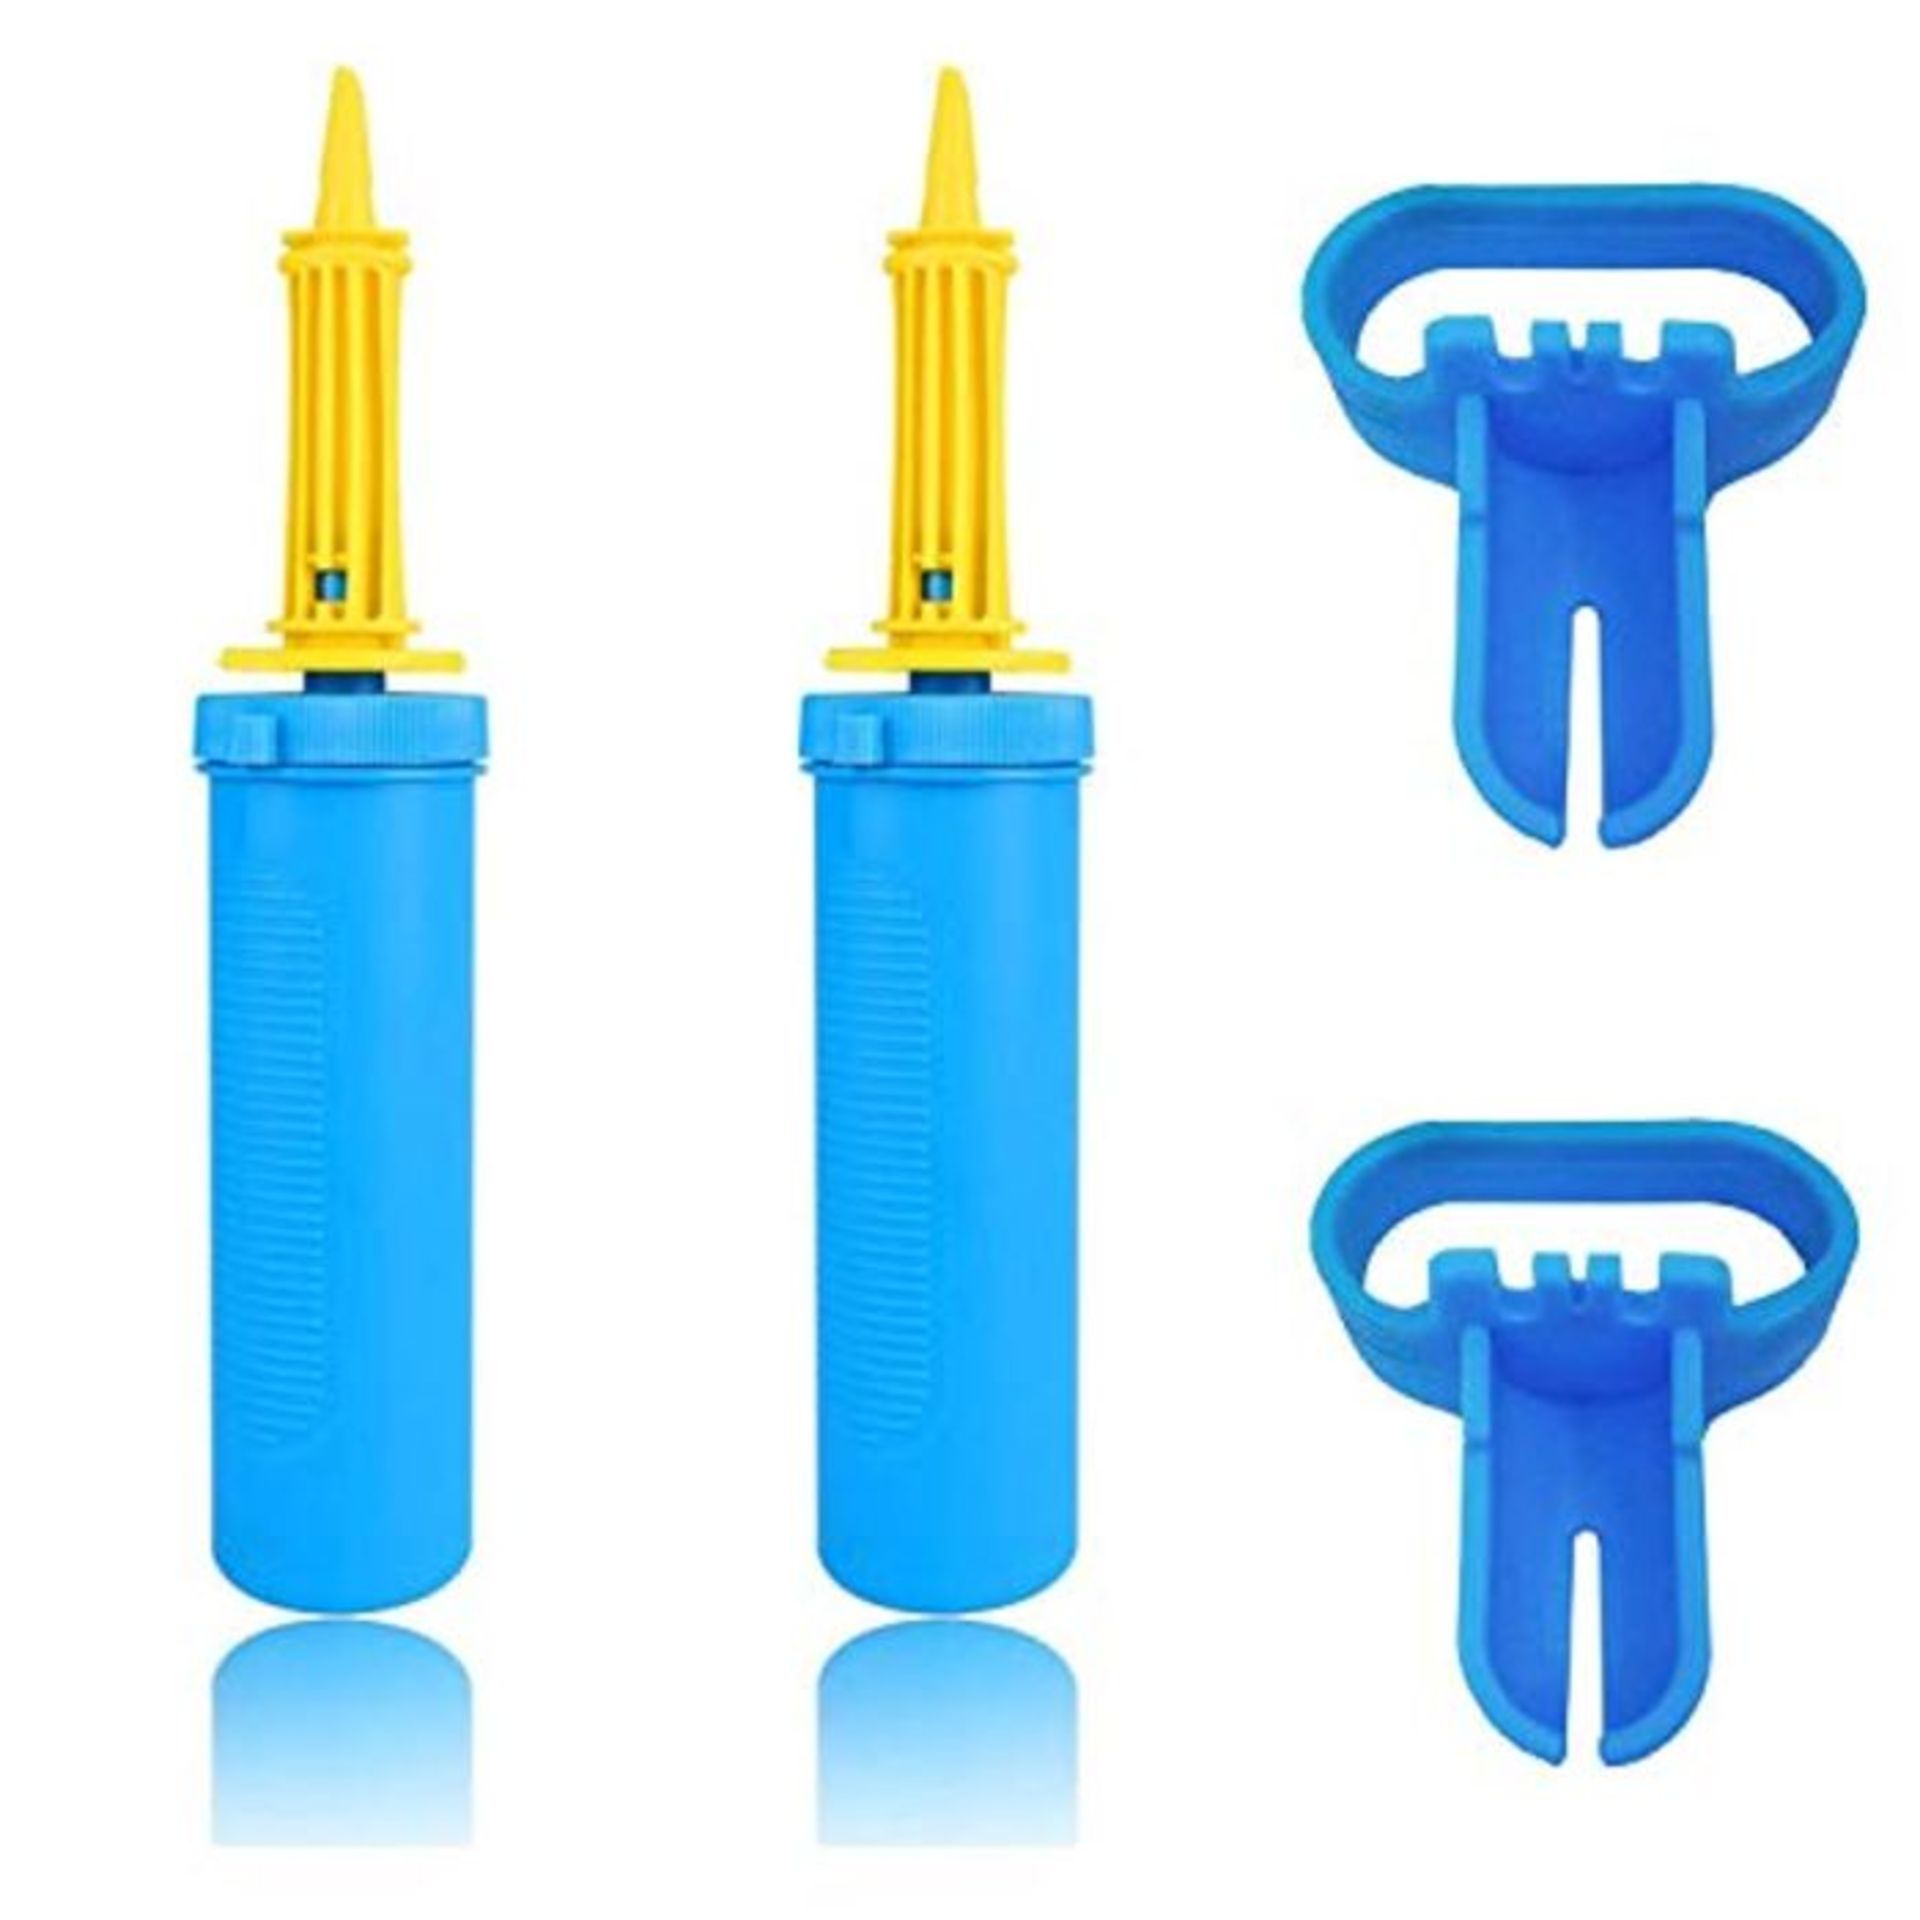 Pack of 2 Hand Pump with 2pcs Balloons tie tool - Double Action Air Pumps for Balloons